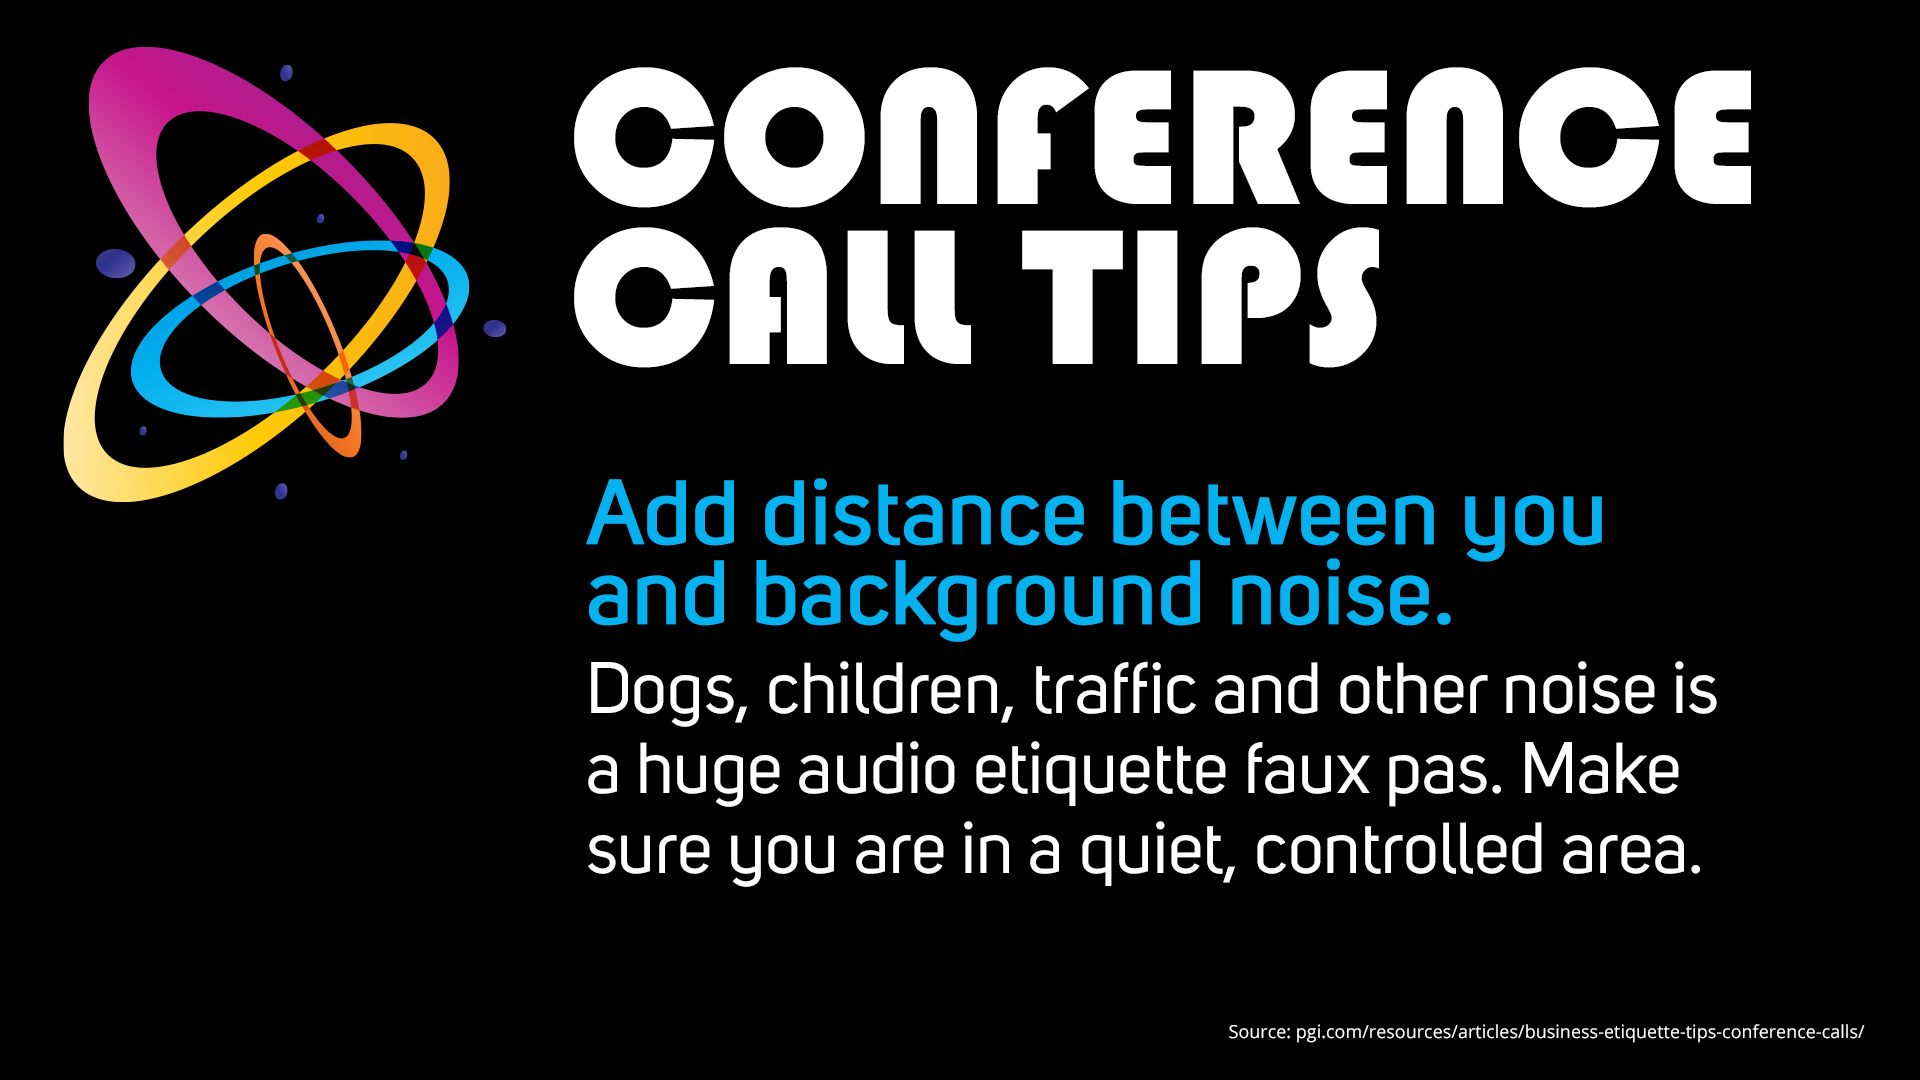 Free Graphic | Conference Call Tips | Get rid of background noise